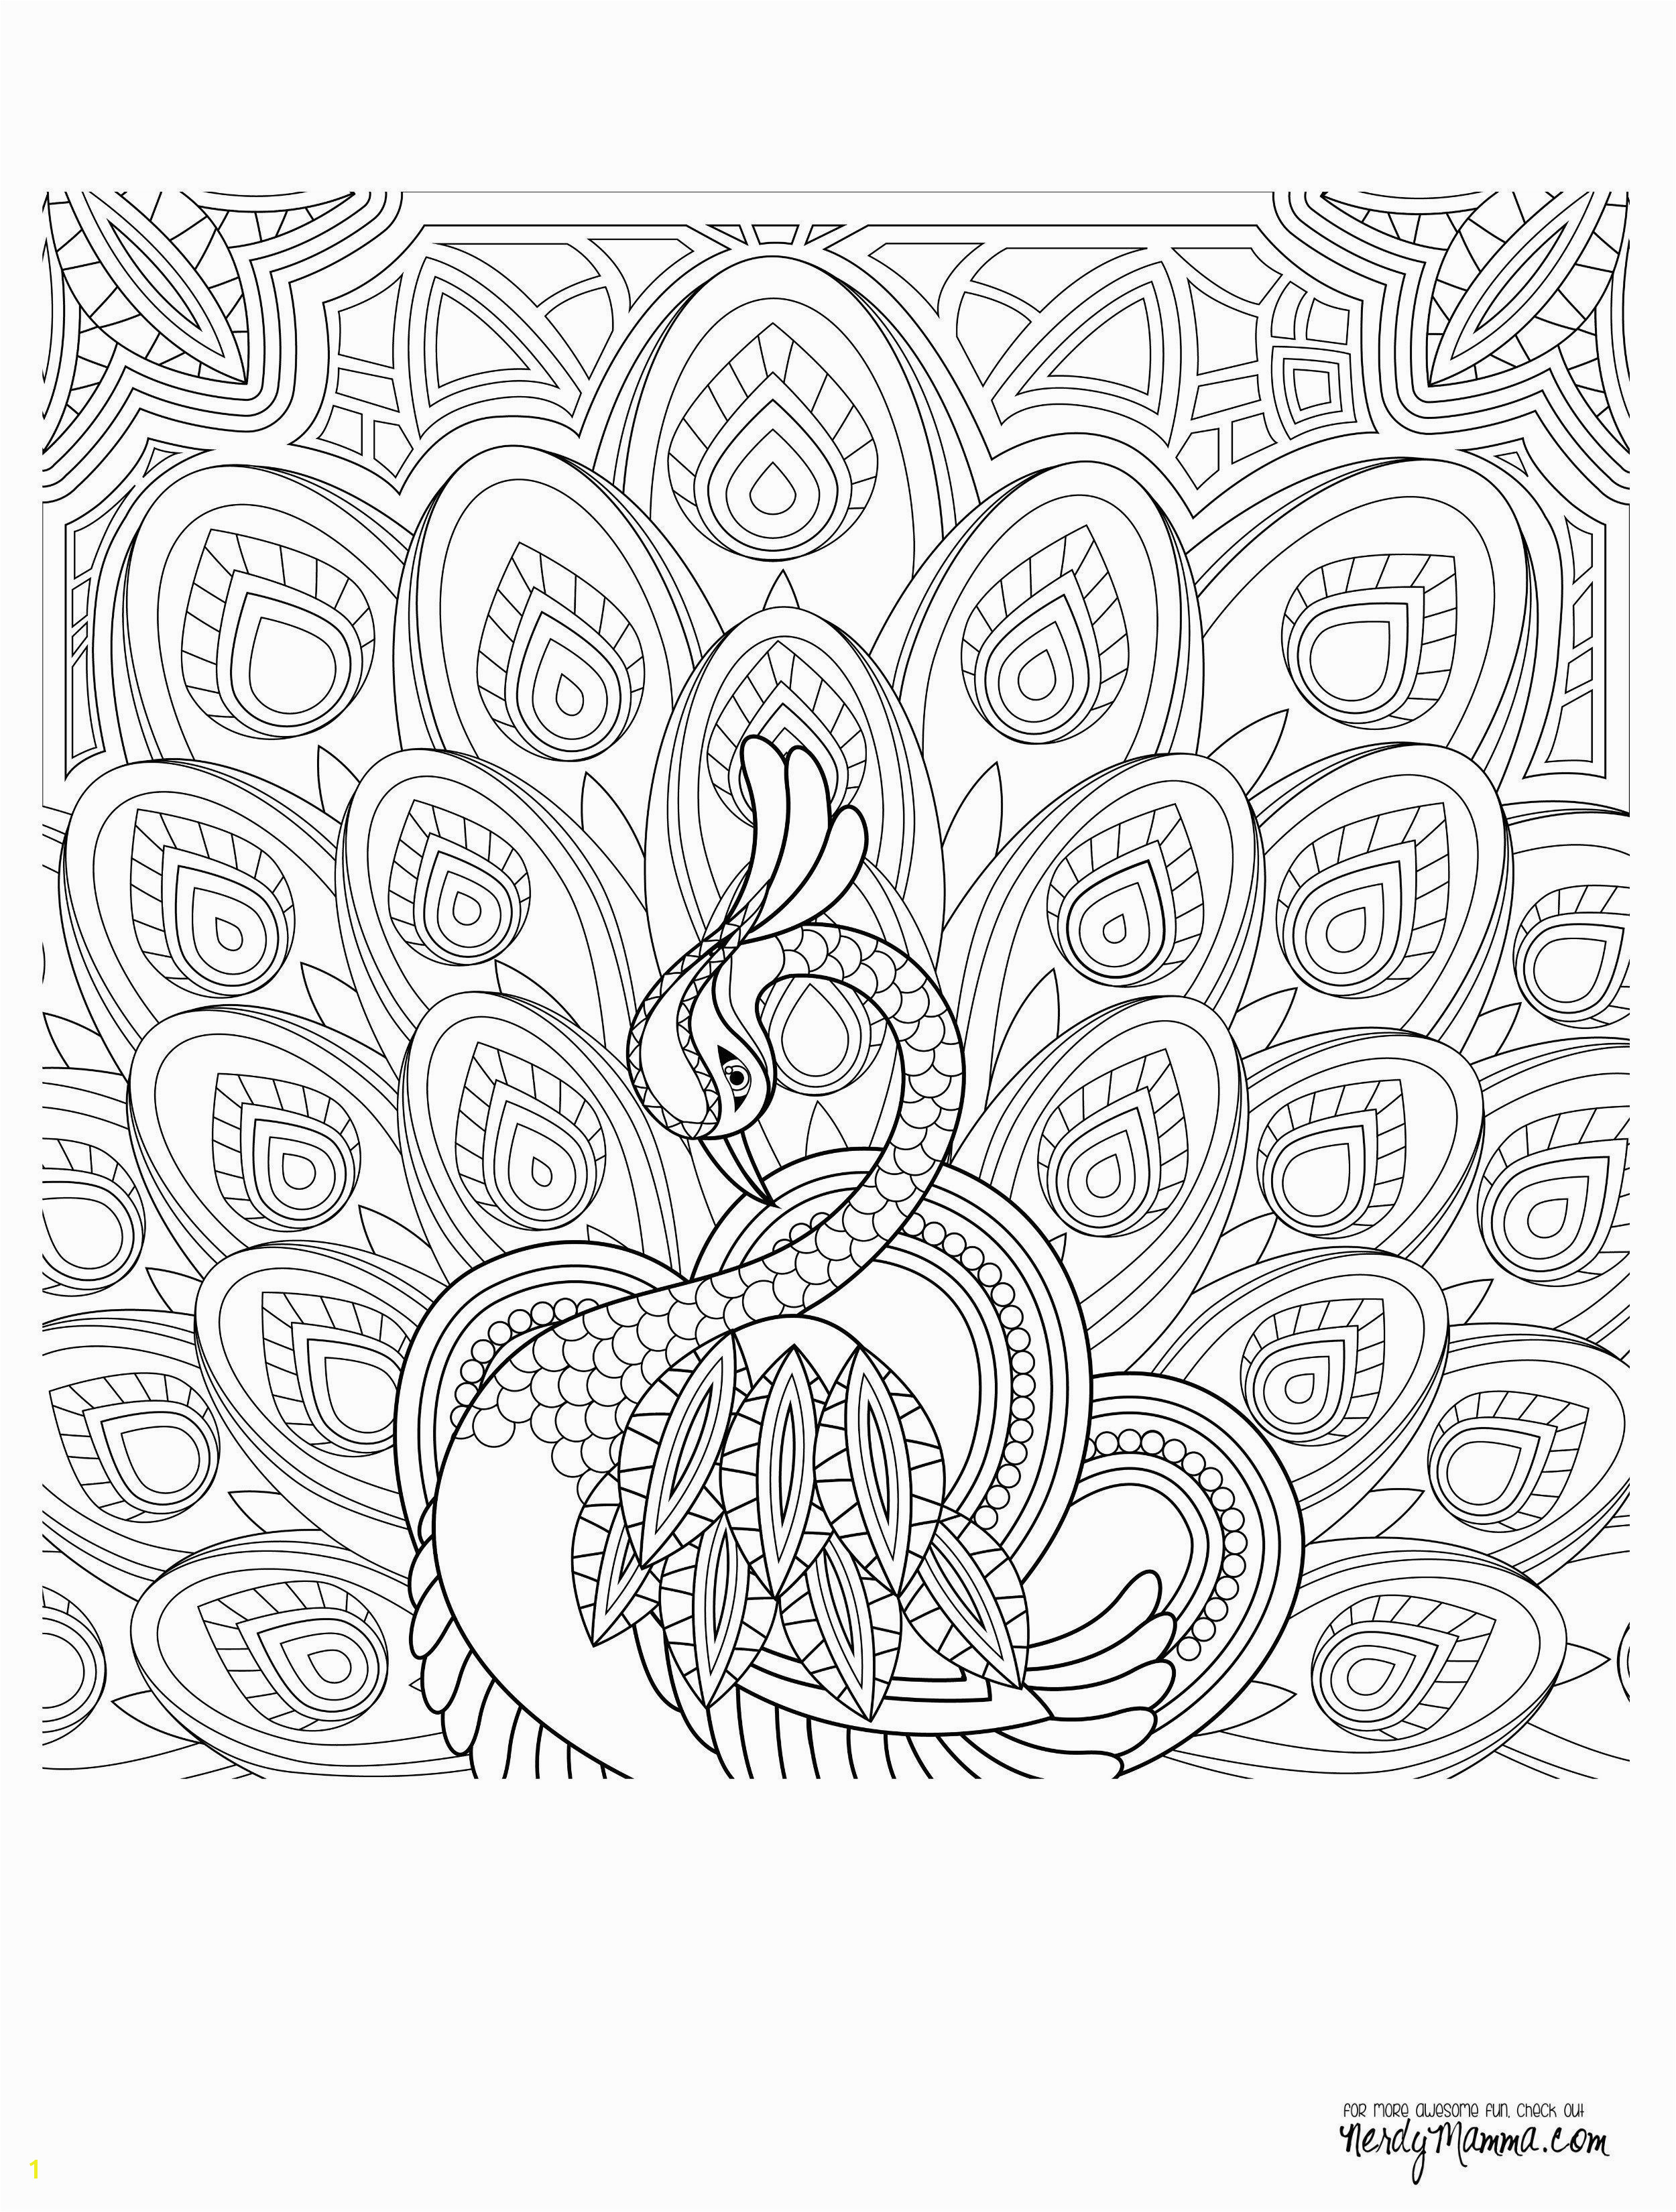 Elf On A Shelf Coloring Pages Printable Elf the Shelf Coloring Sheets Beautiful Elegant Free